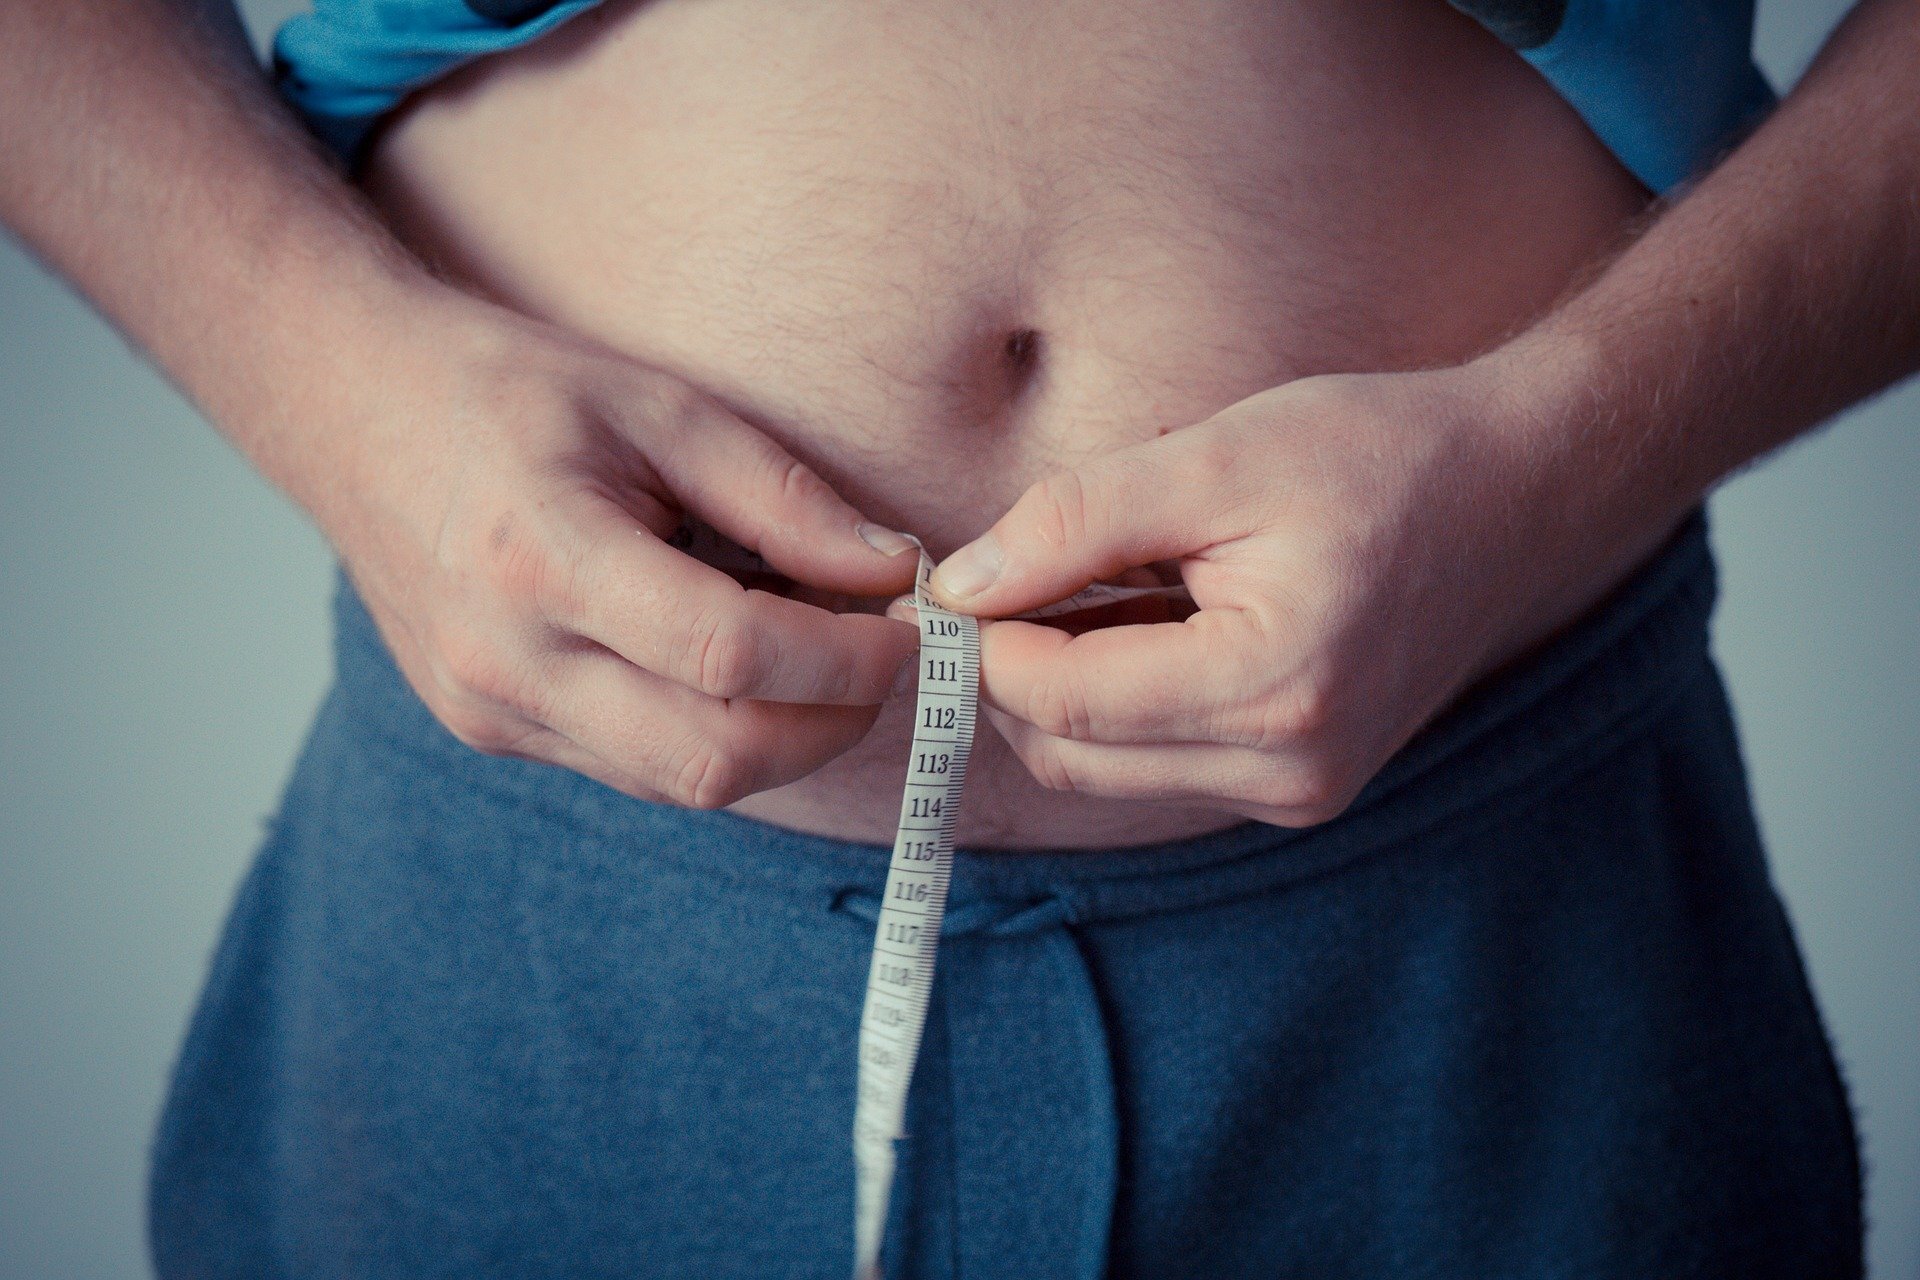 #Study attempts to identify bacterial indicator species of obesity and metabolic syndrome in adult and pediatric patients